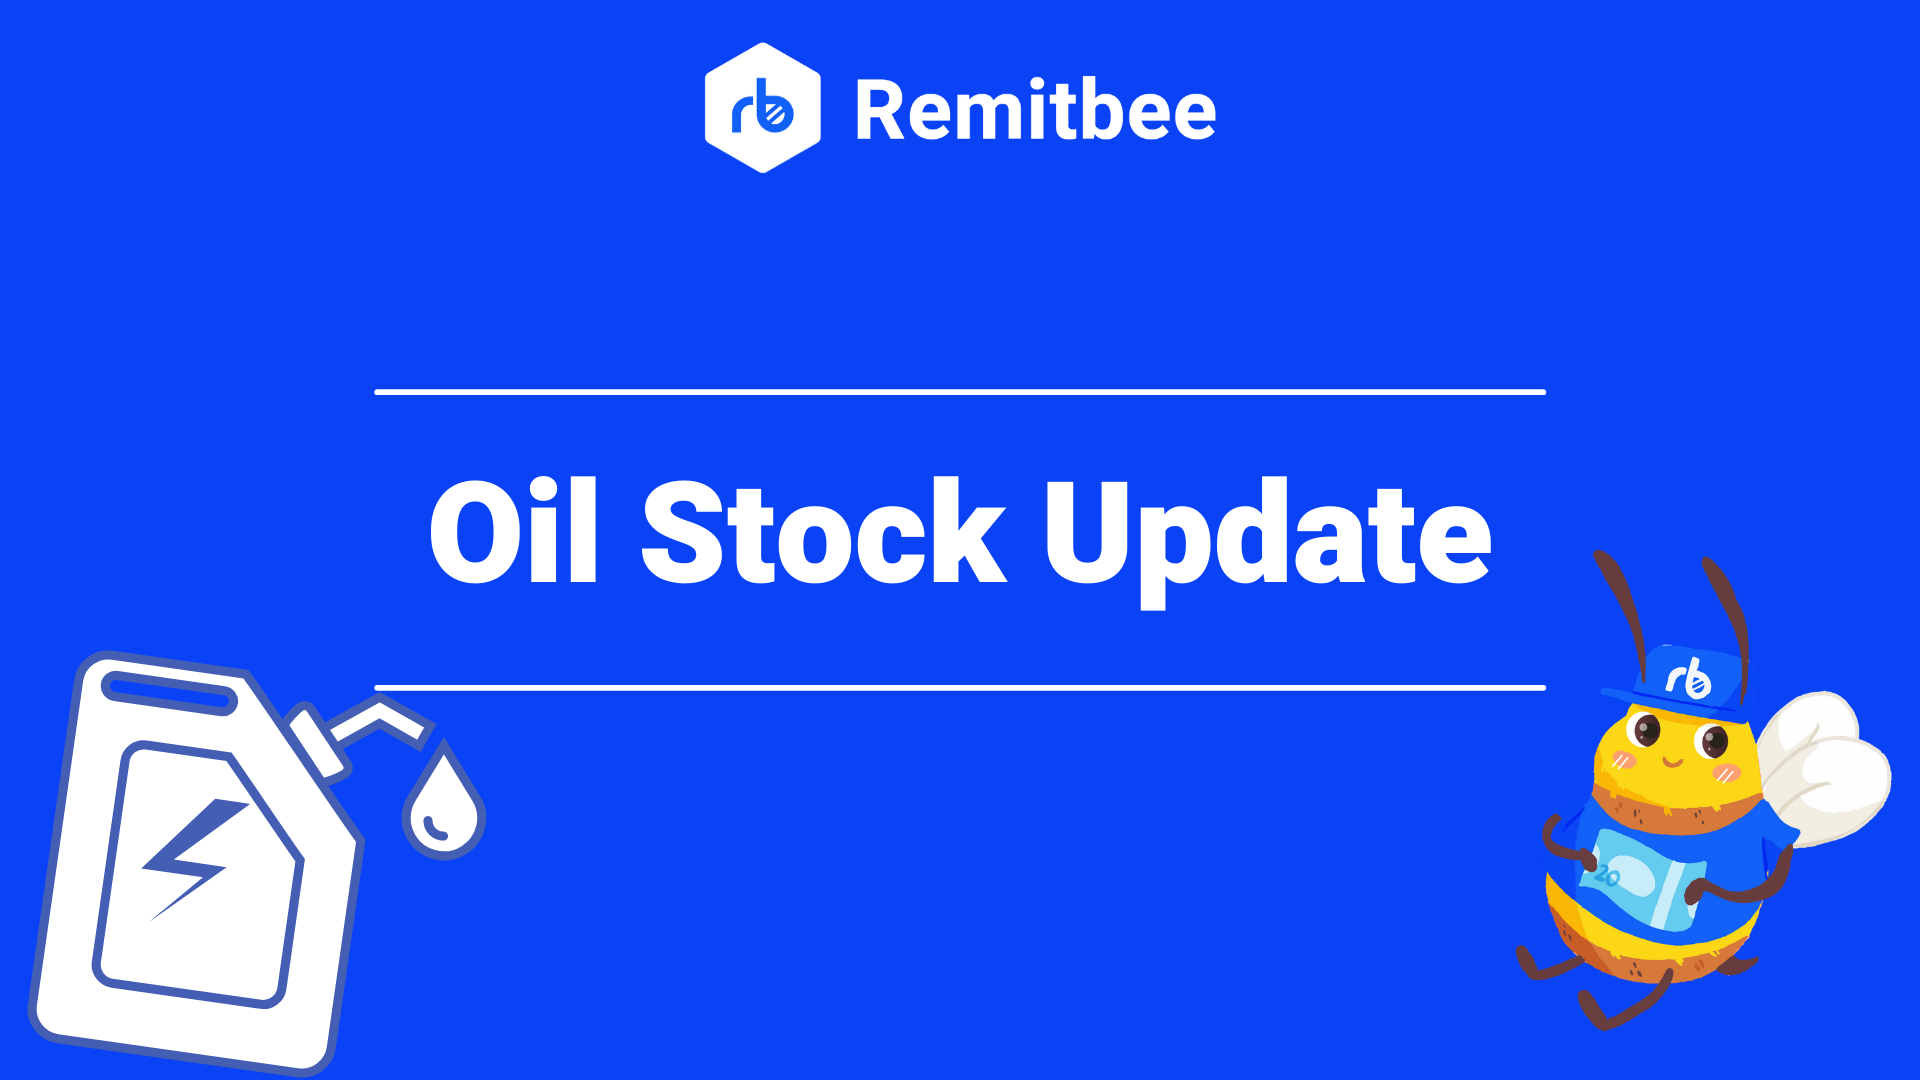 An Update on Oil Stock 